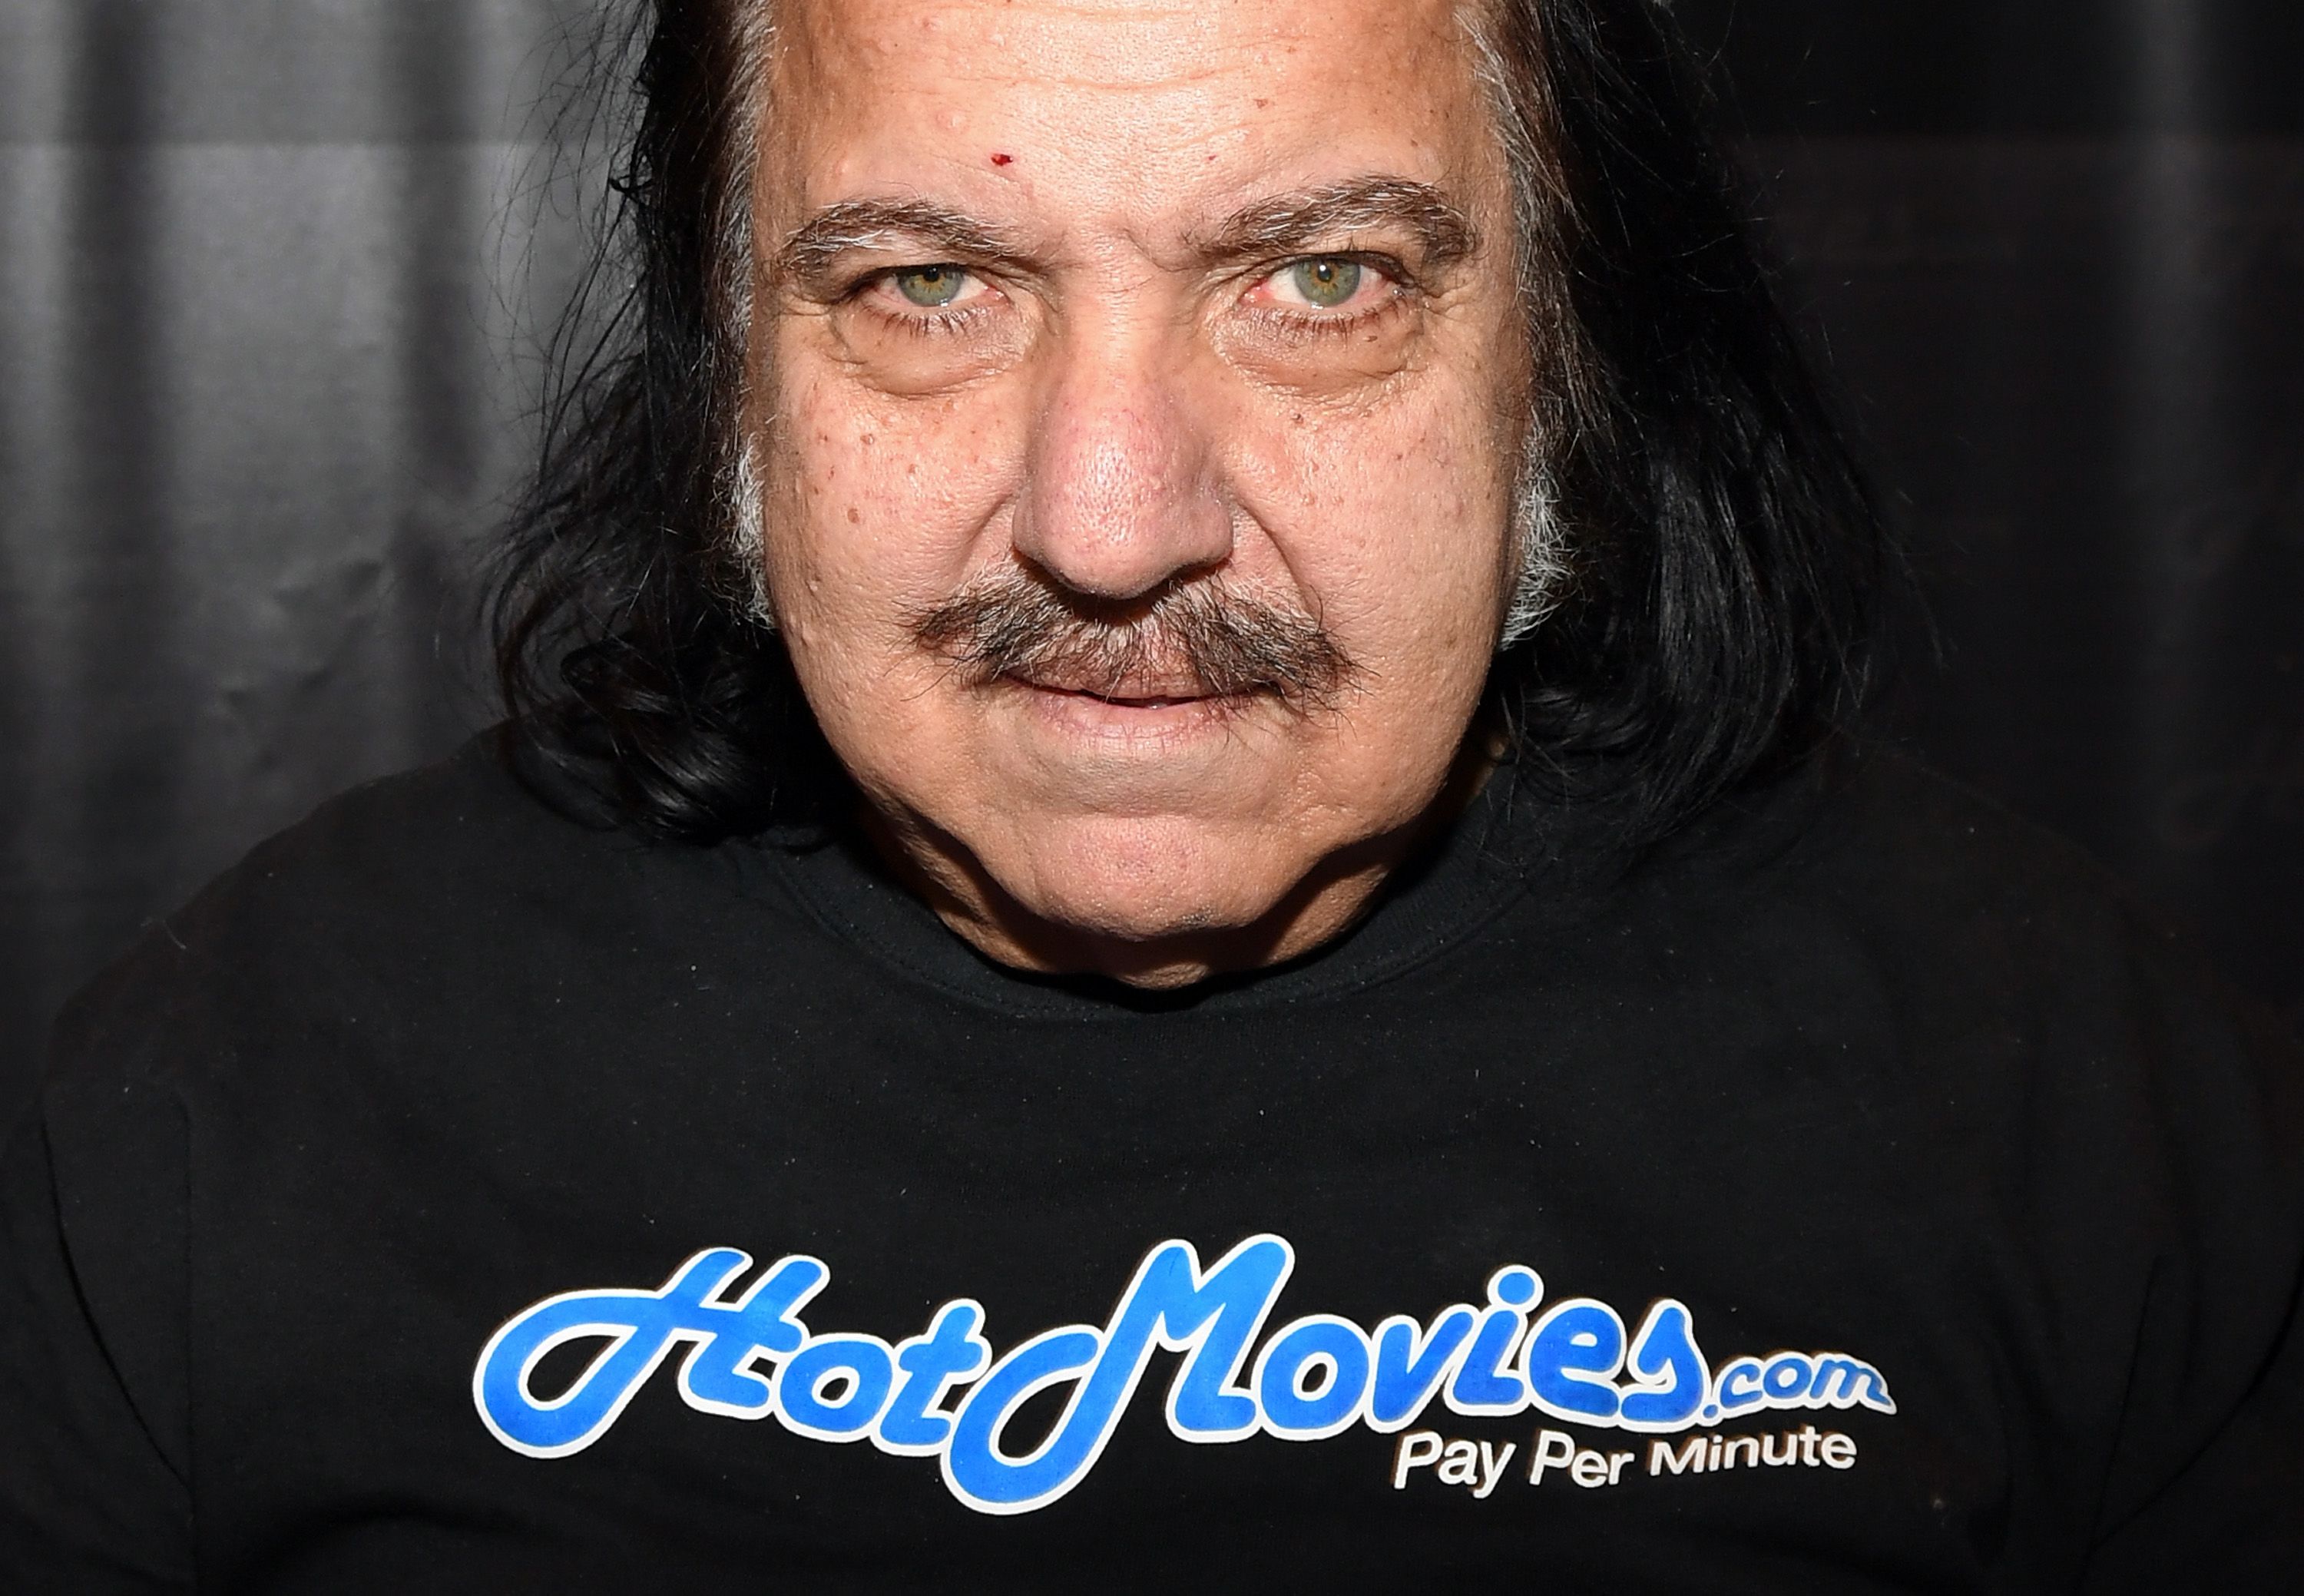 Wife Forced Jabardasti Rap Xxx - Ron Jeremy, porn star, charged with sexually assaulting four women | CNN